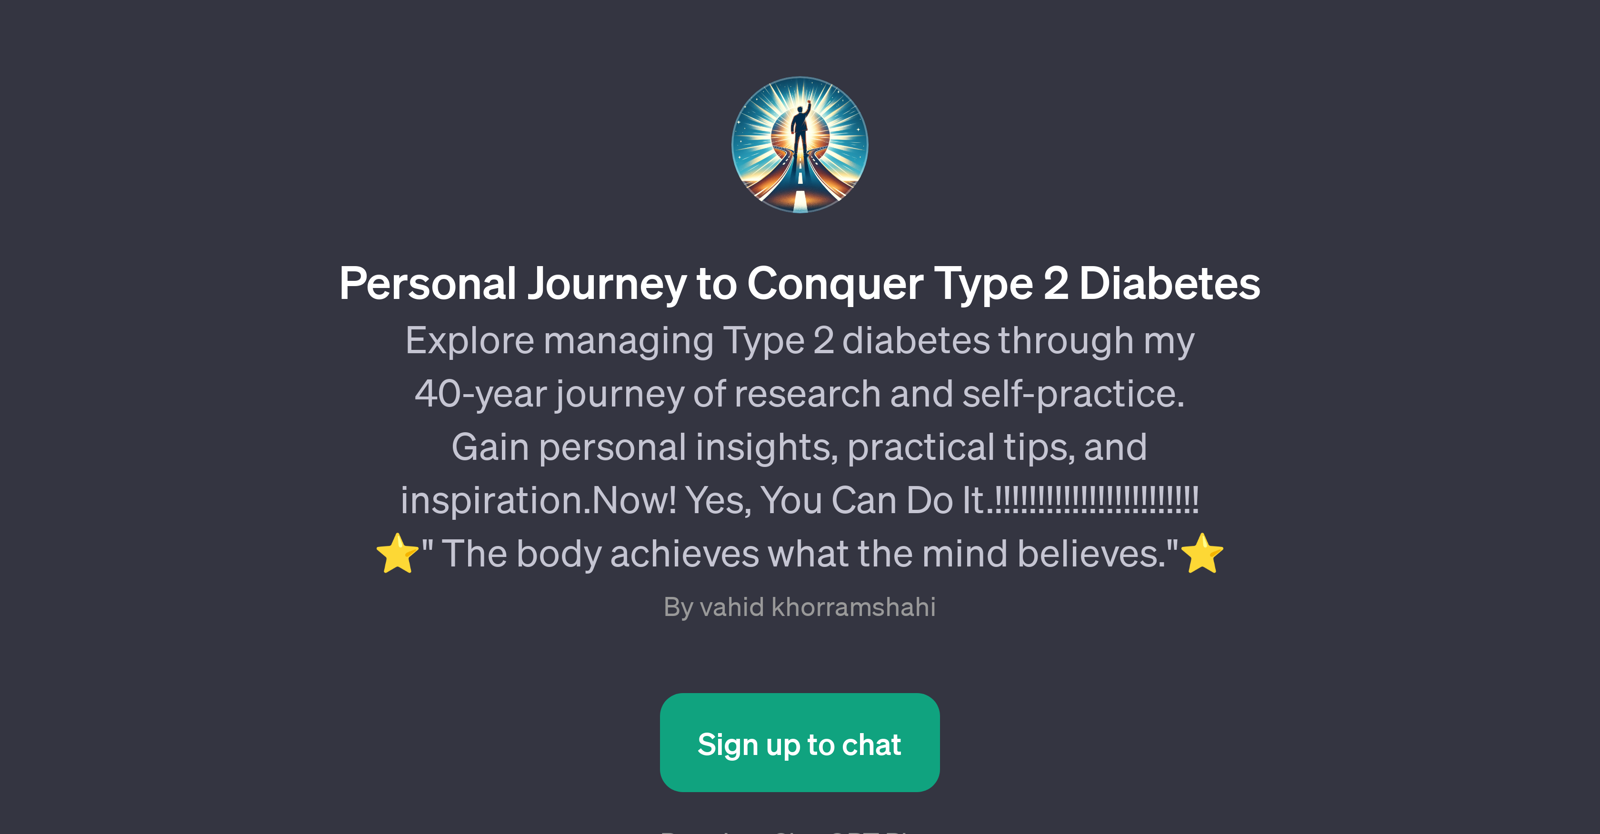 Personal Journey to Conquer Type 2 Diabetes website